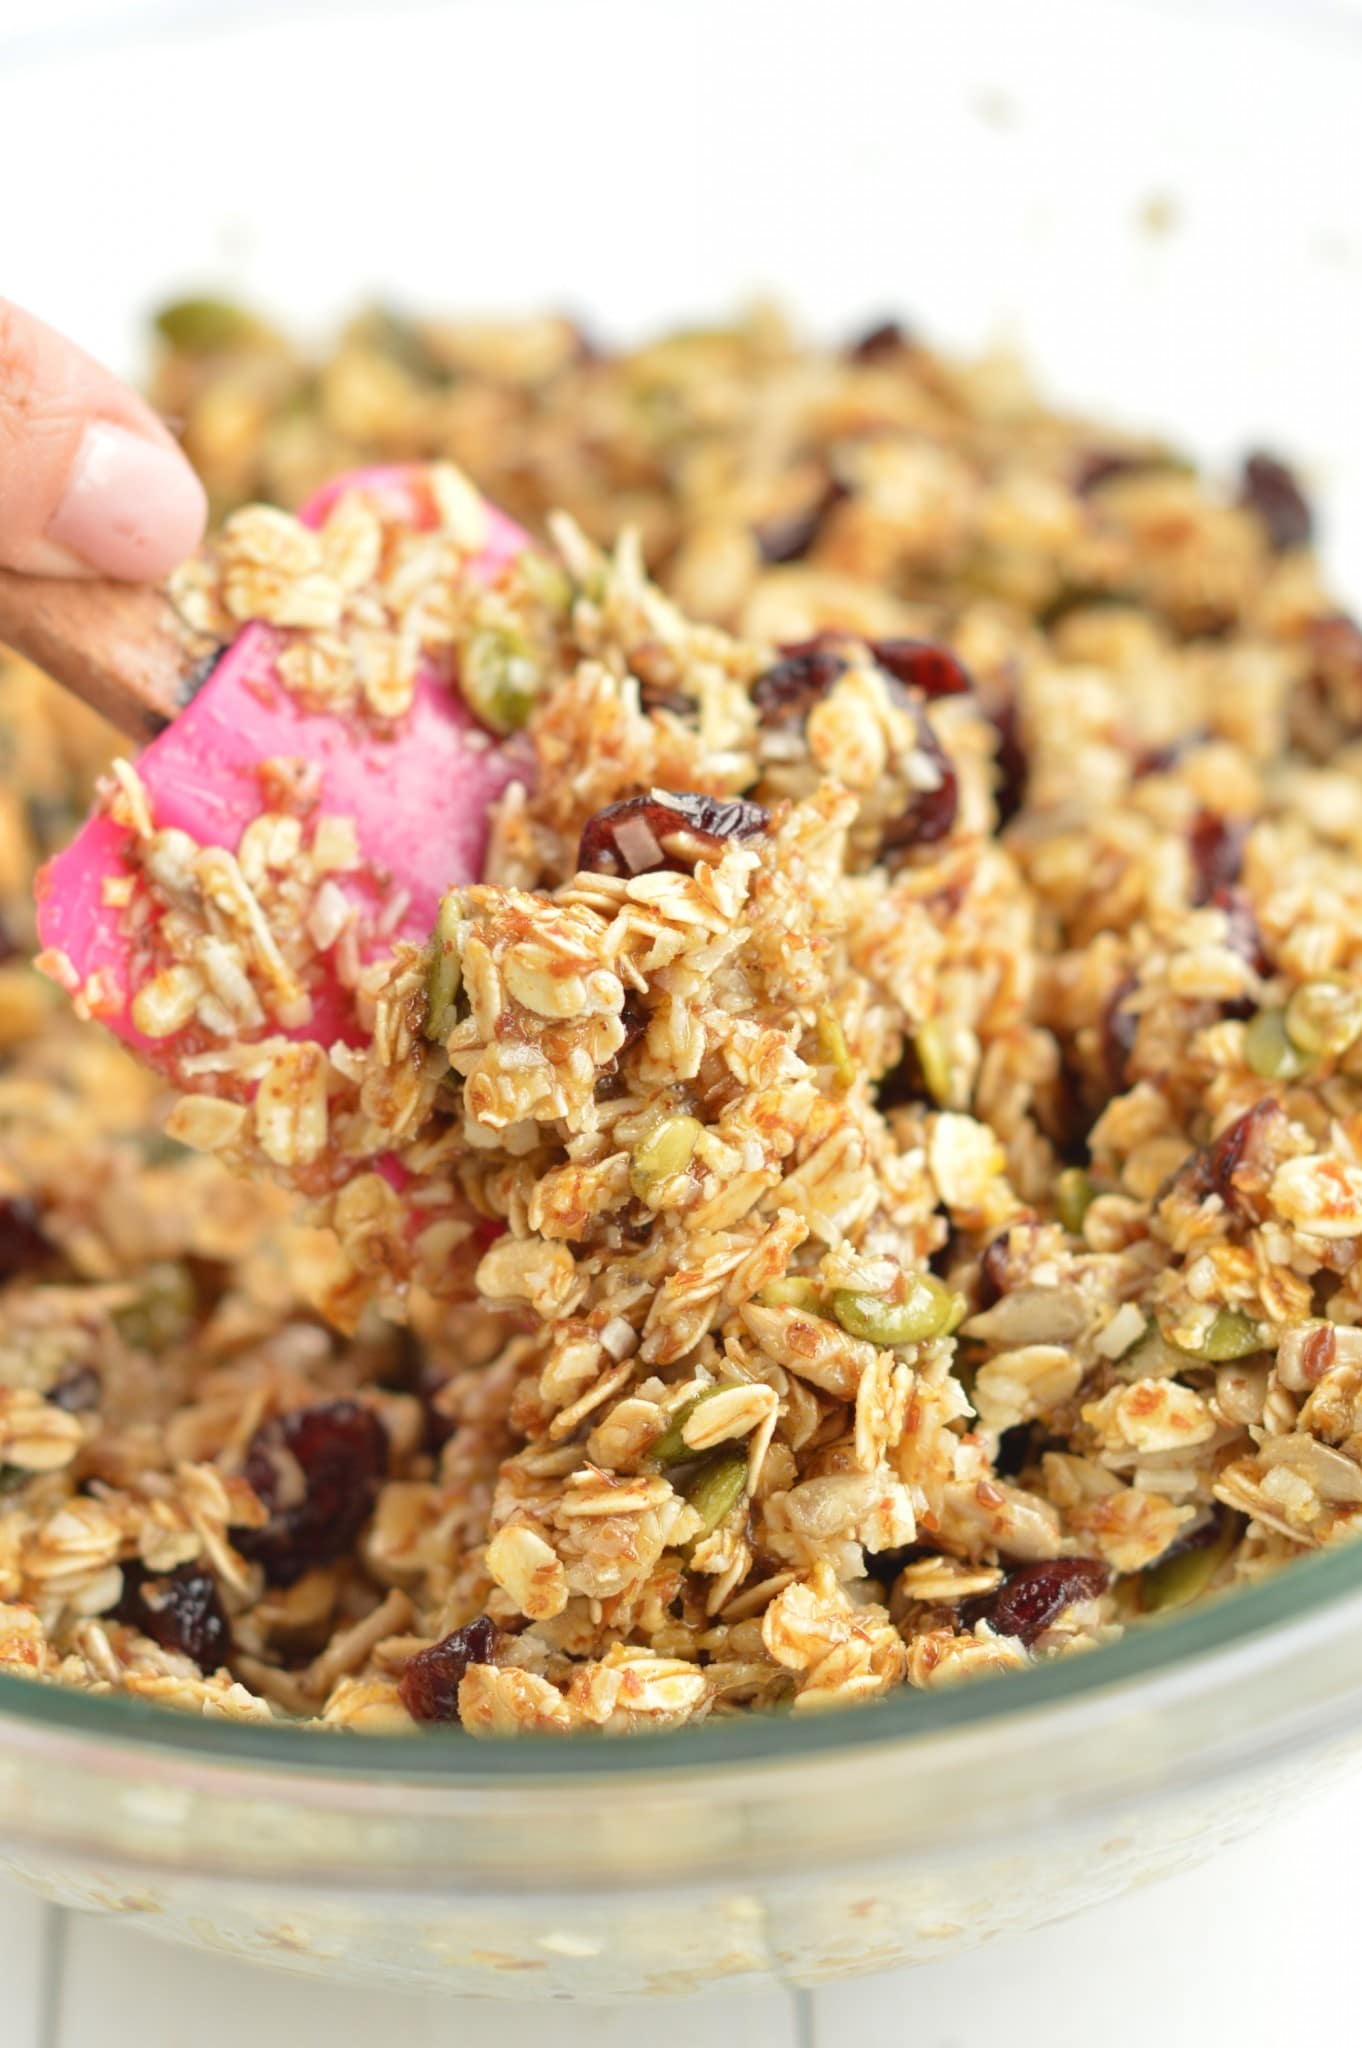 Easy Oatmeal Breakfast Cookies with wholegrain oats, coconut , cranberries and pumpkin seeds. A healthy grab and go breakfast to kick start morning energy.